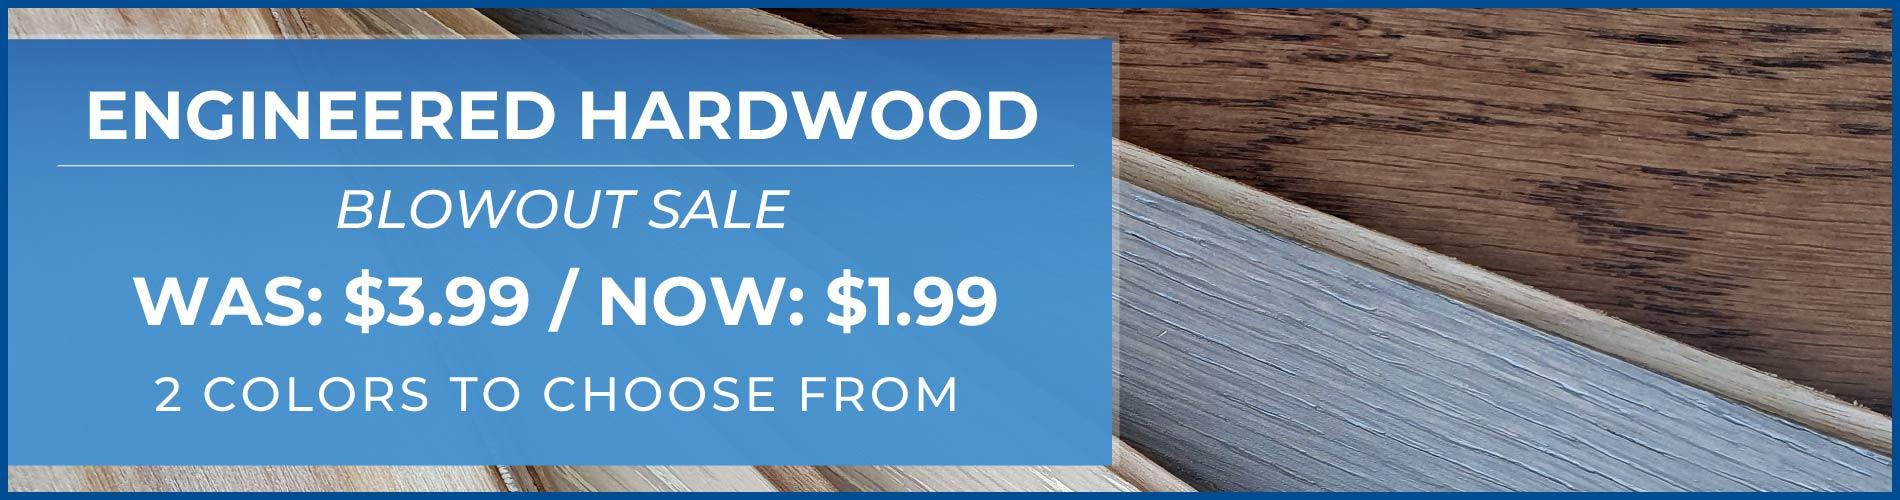 Engineered hardwood blowout sale was $3.99 now $1.99. 2 colors to choose from